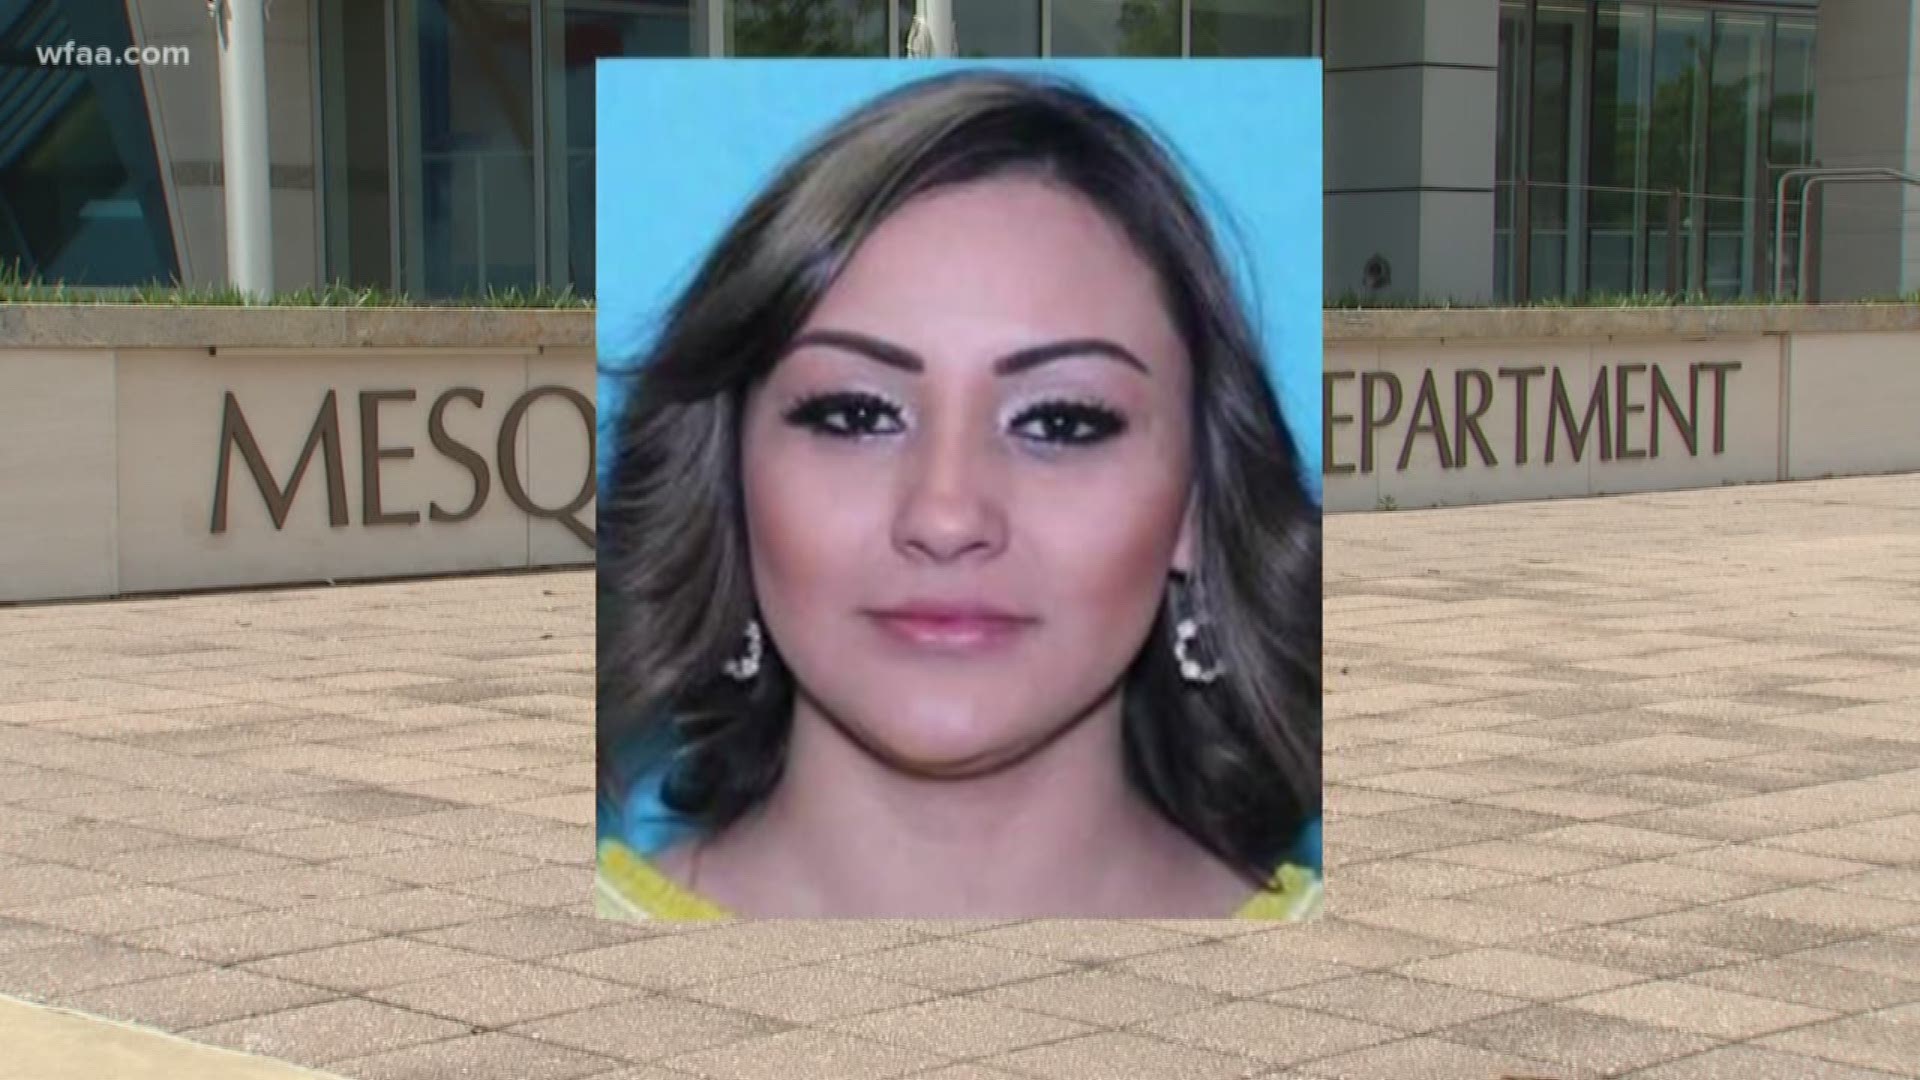 Prisma Reyes, 26, was reported missing on Wednesday to the Mesquite Police Department. Her stepfather spoke to WFAA.